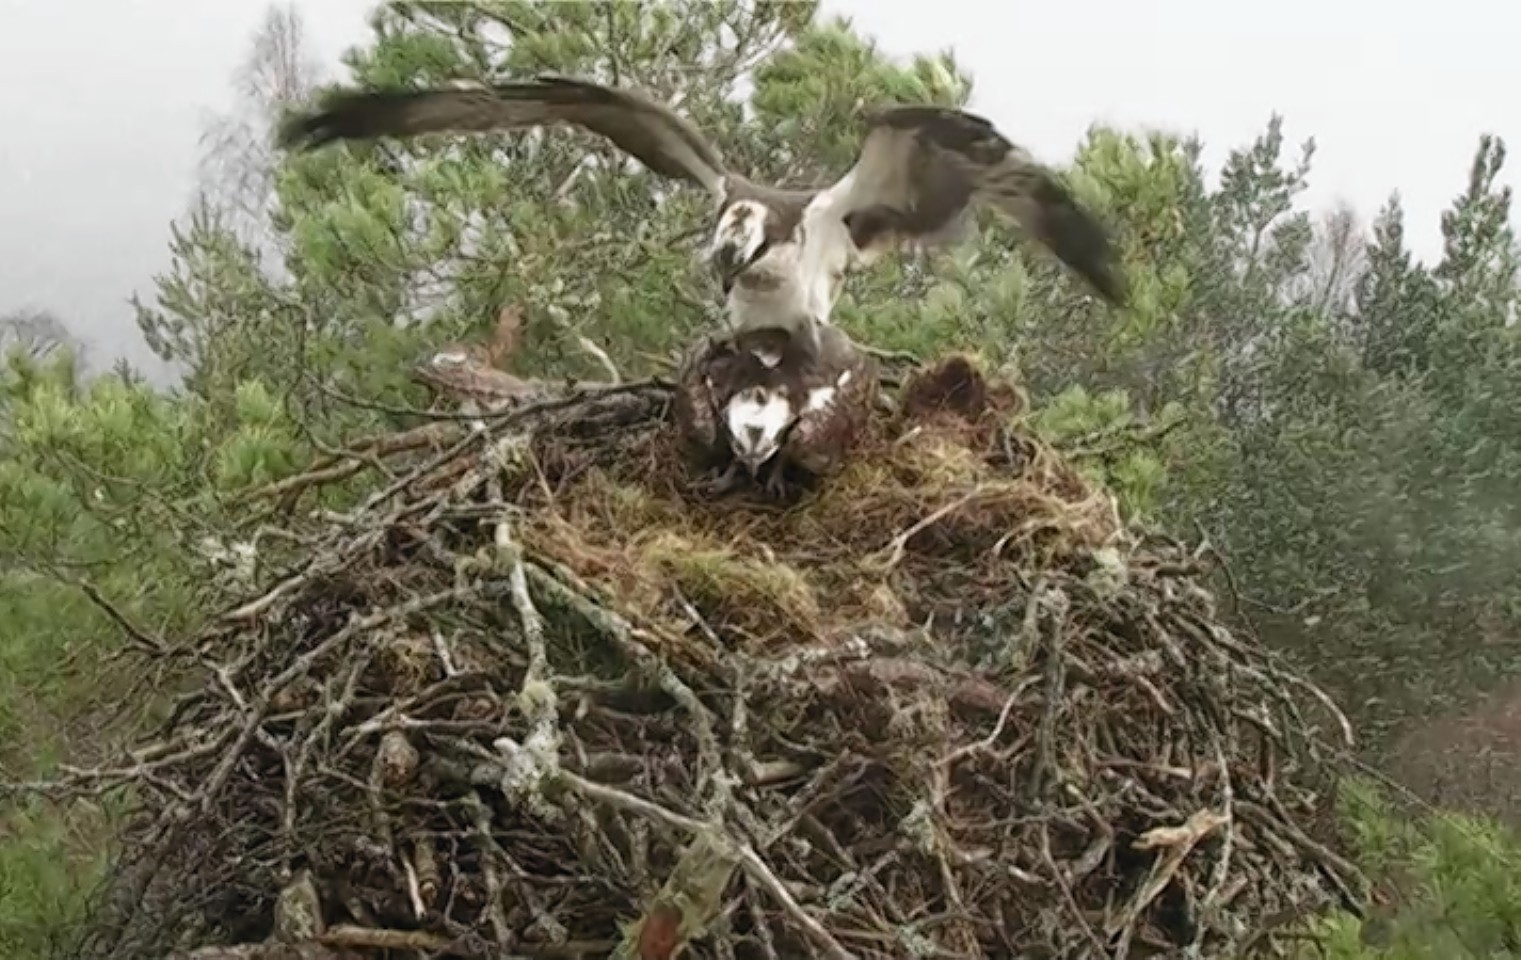 The new osprey at the Loch of the Lowes nest